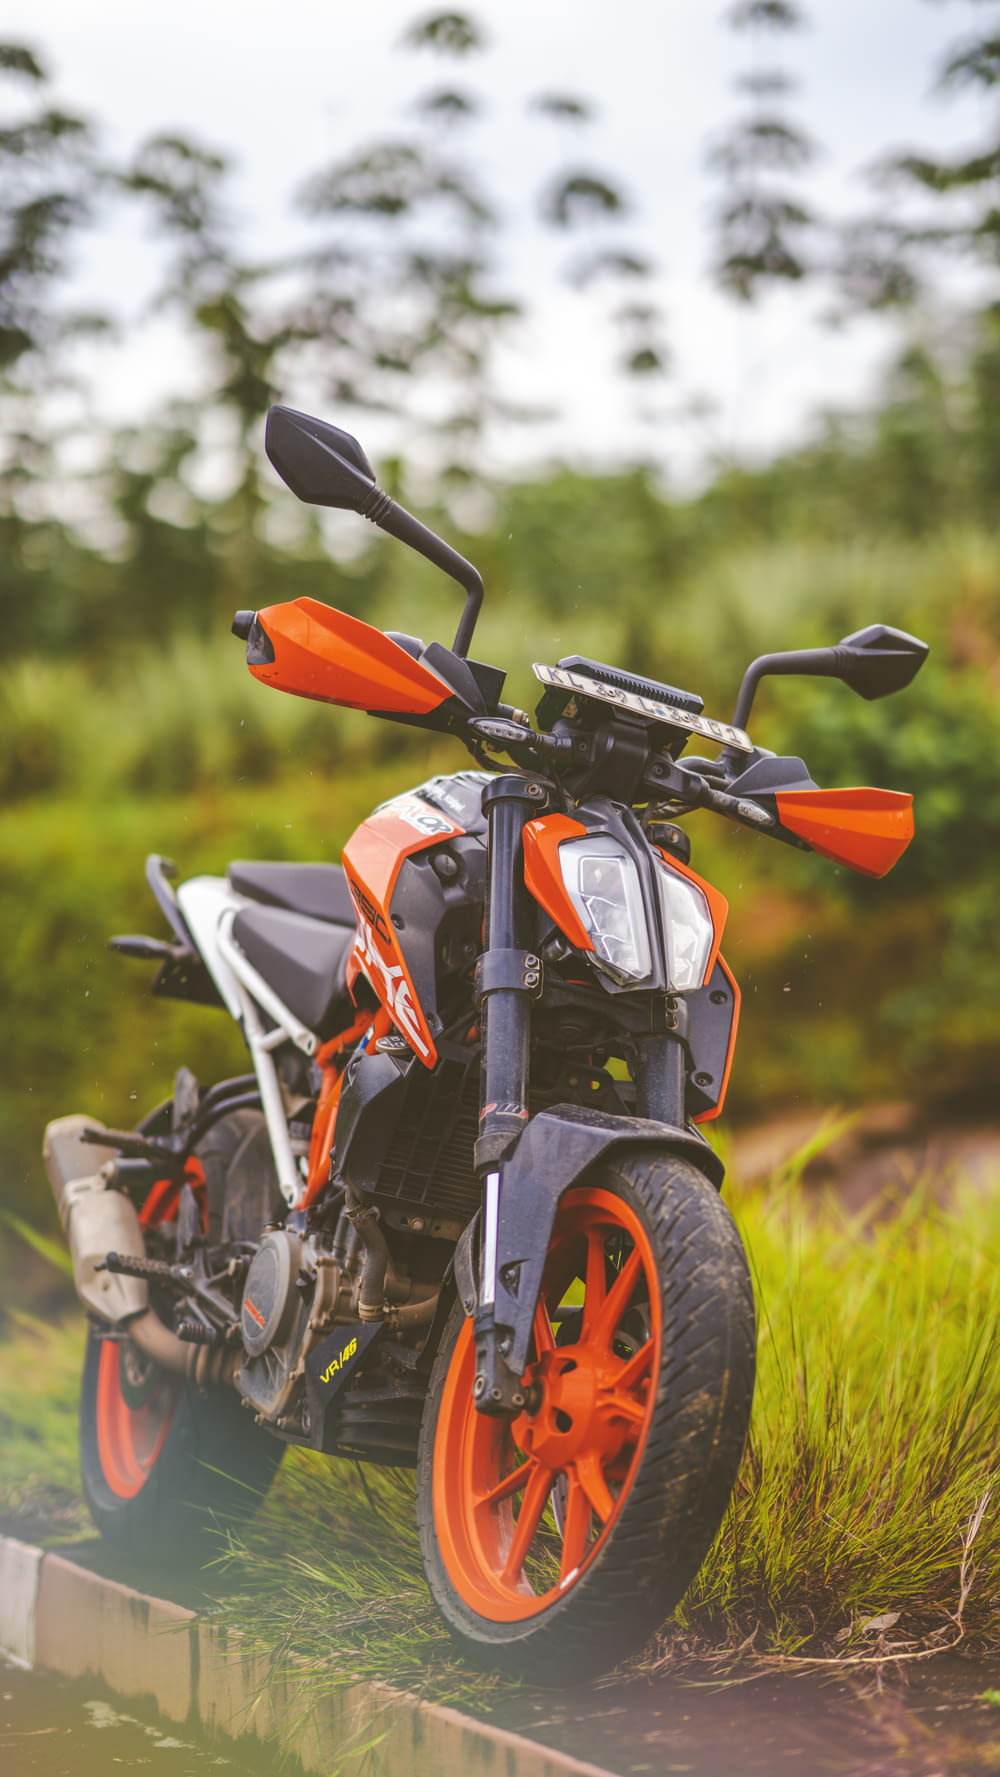 black and orange motorcycle on green grass during daytime